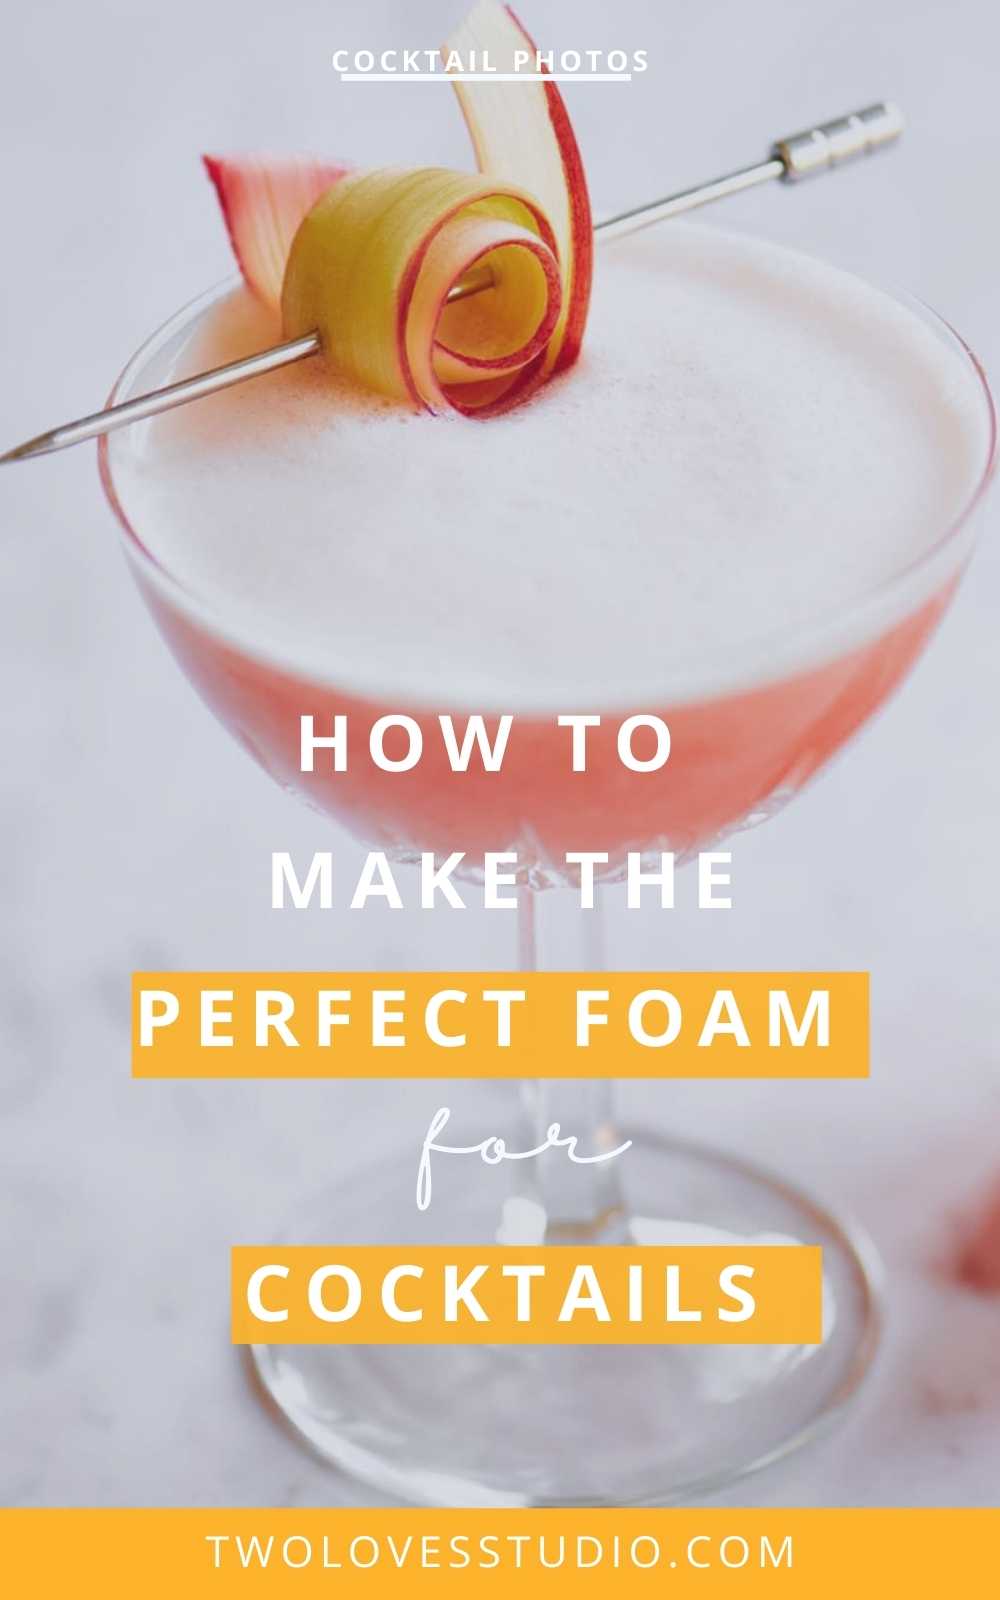 Cocktail Foams: How to Use them in Cocktails